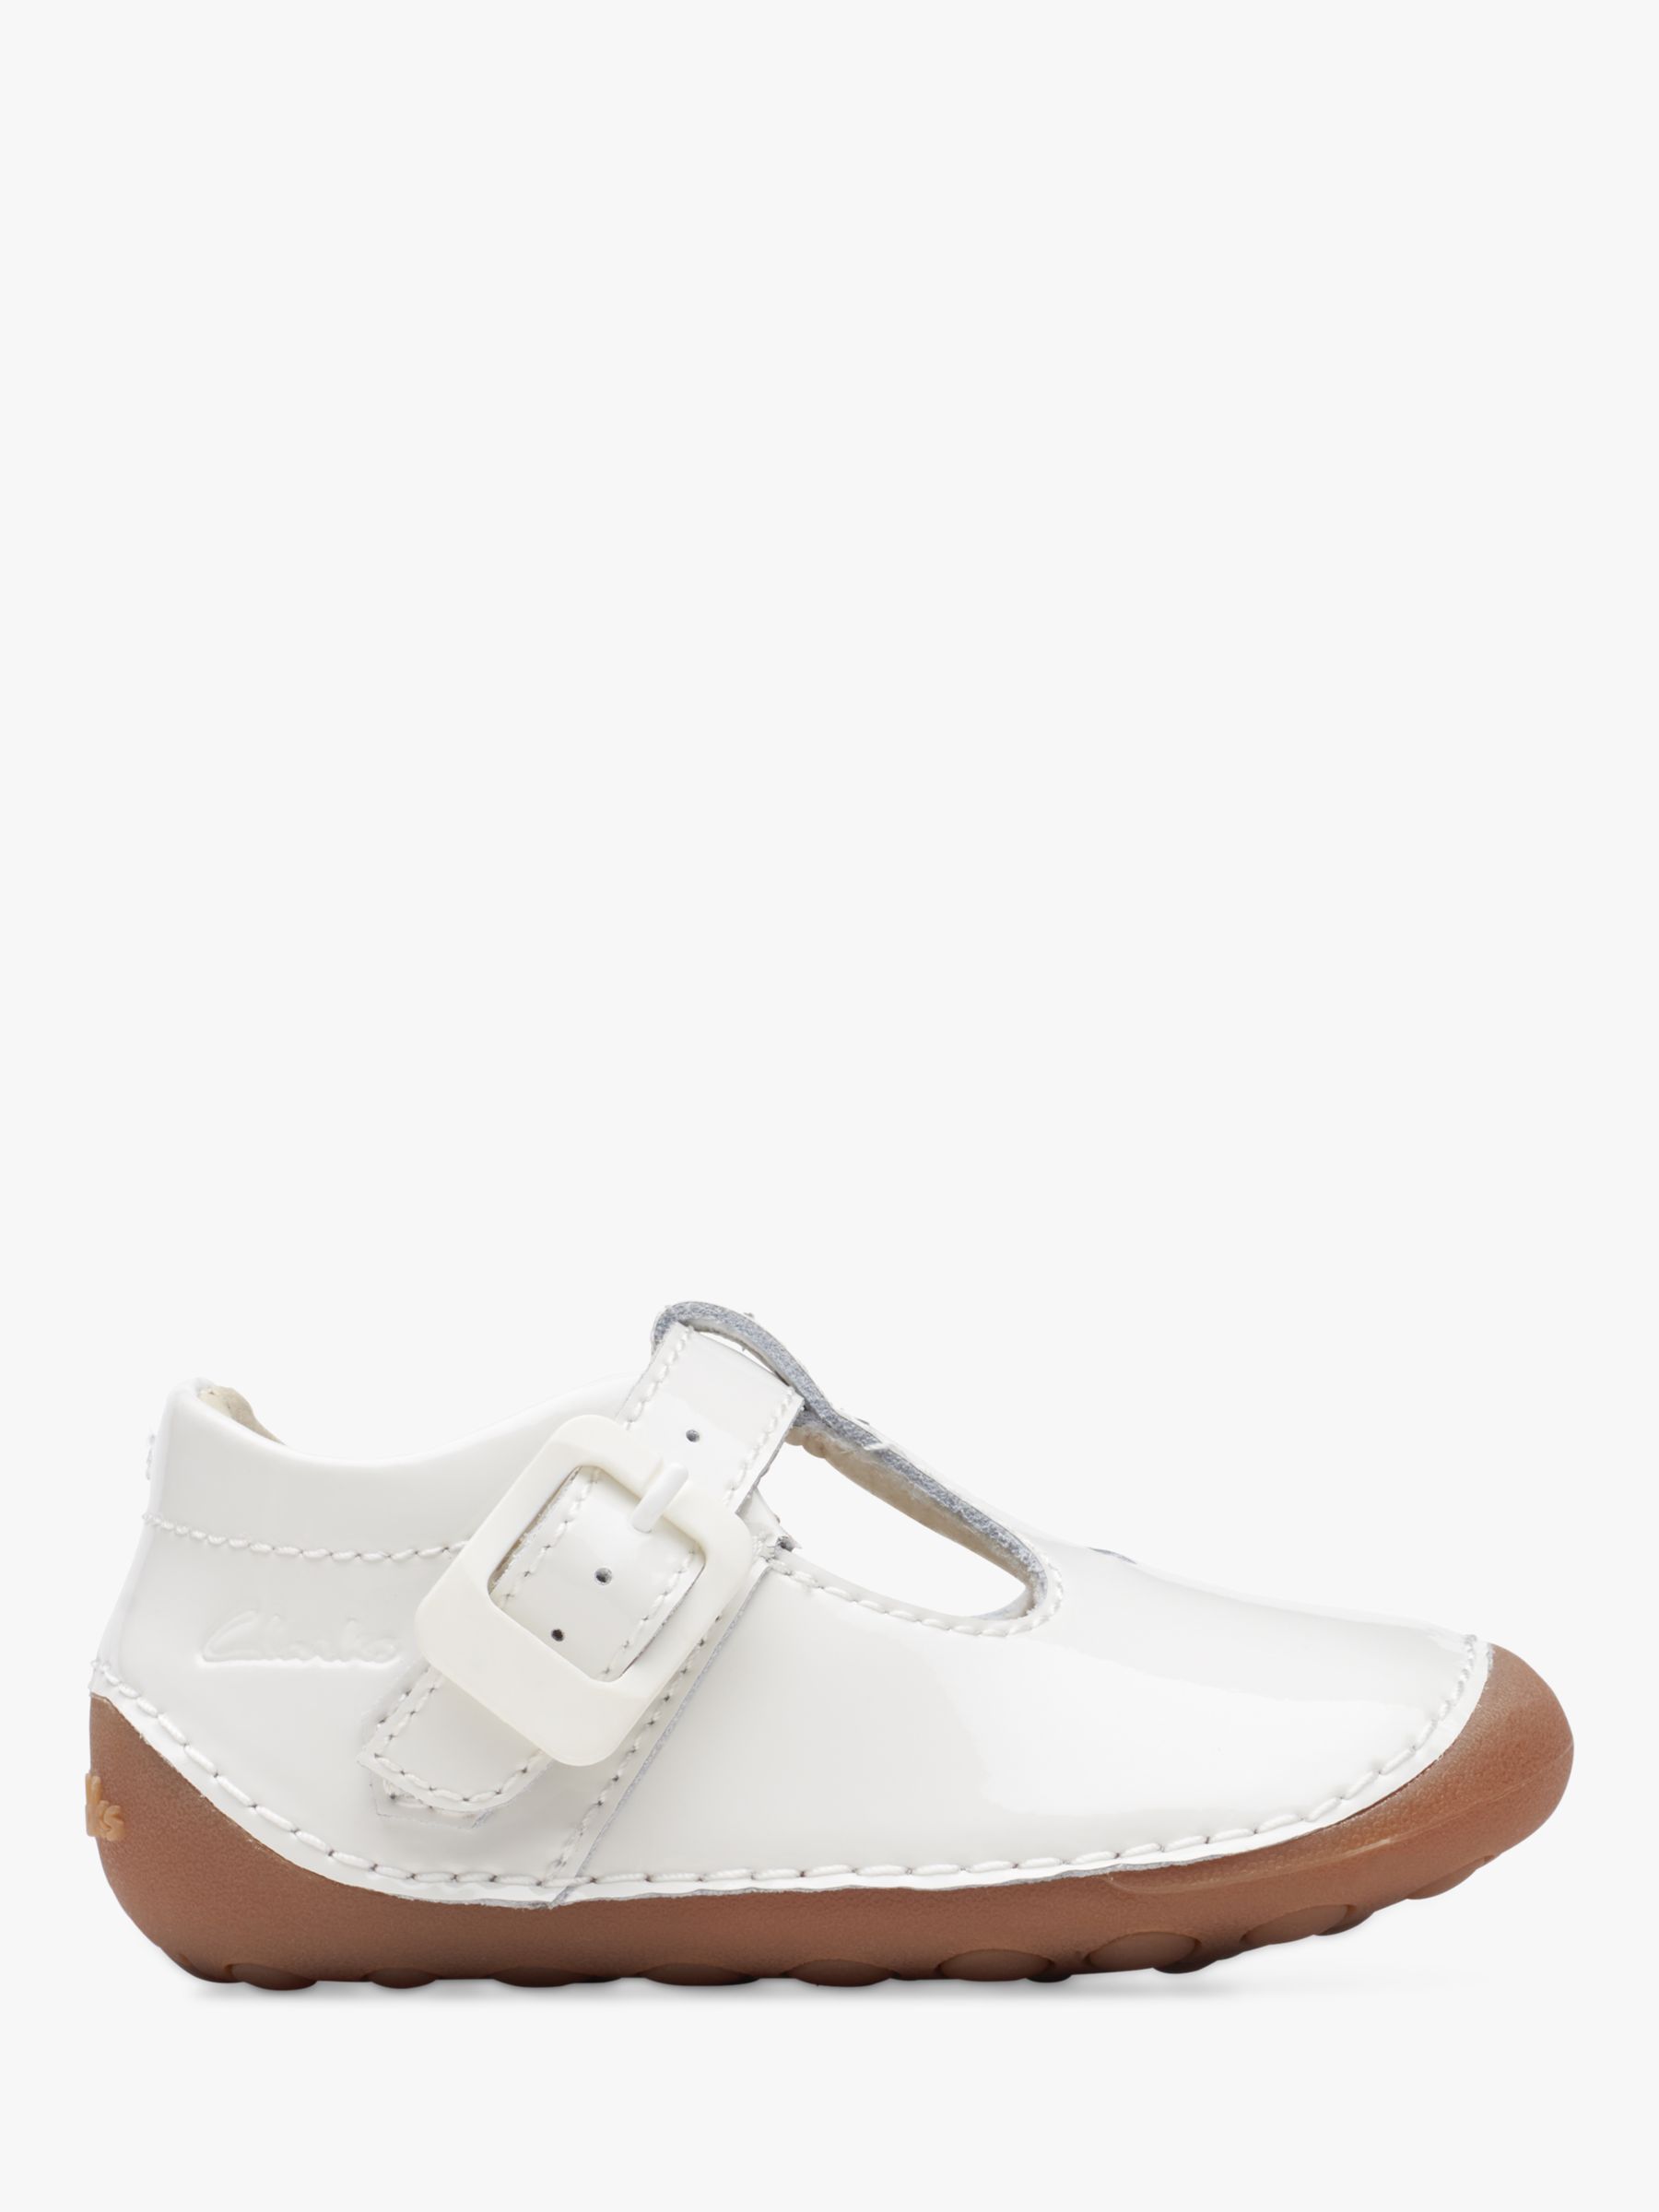 Clarks Baby Tiny Beat Patent Buckle Shoes, White, 2F Jnr